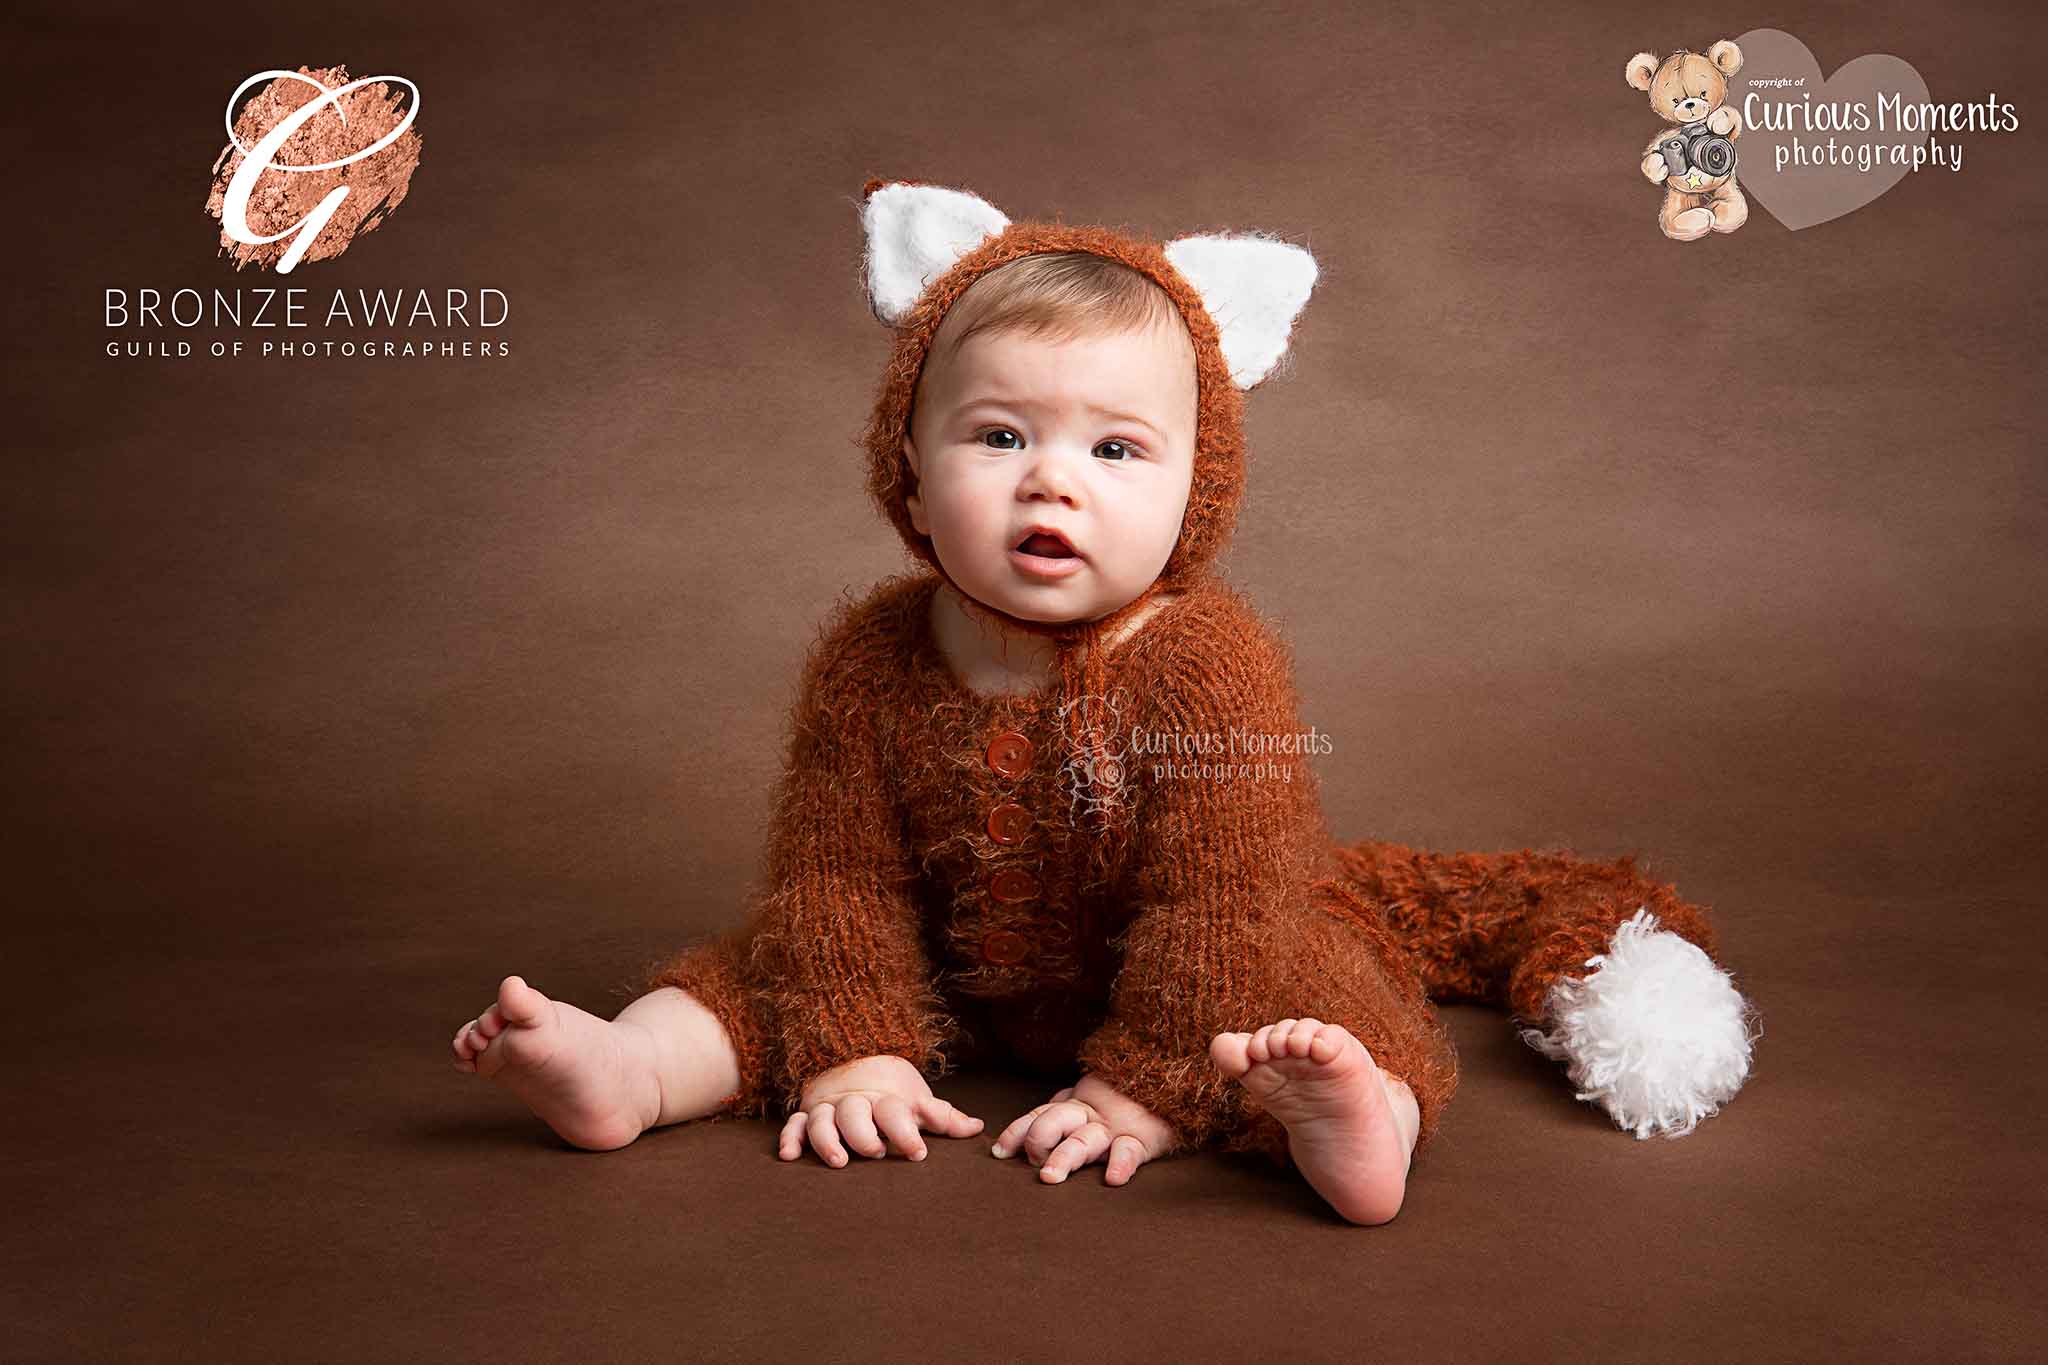 Award winning image taken by pembrokeshire photographer of baby boy wearing a knitted fox outfit sat on a brown backdrop